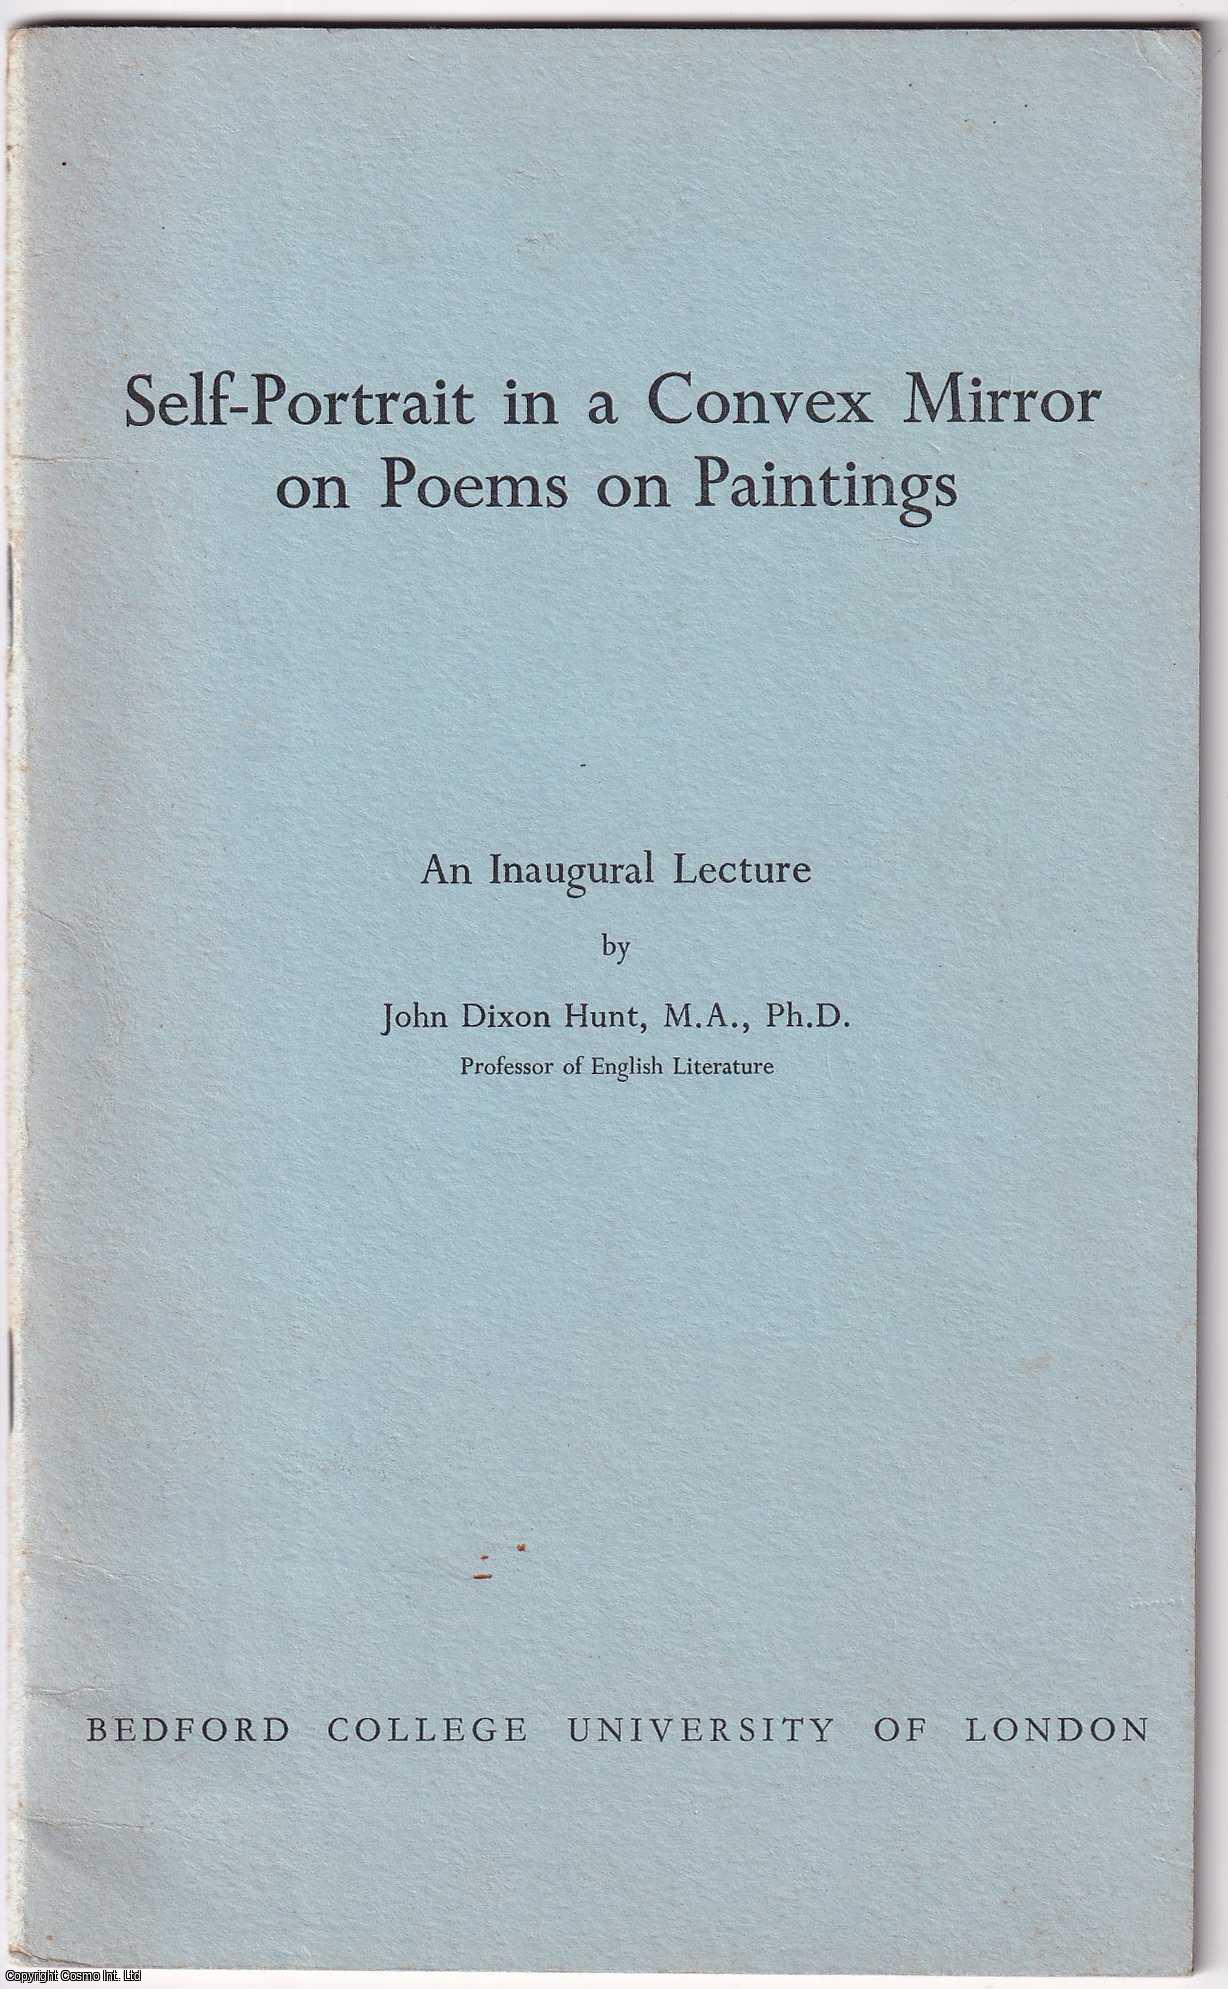 John Dixon Hunt, M.A., Ph.D., Prof. of English Literature - Self-Portrait in a Convex Mirror on Poems on Paintings. With an inscription by the author to Charles Tomlinson.